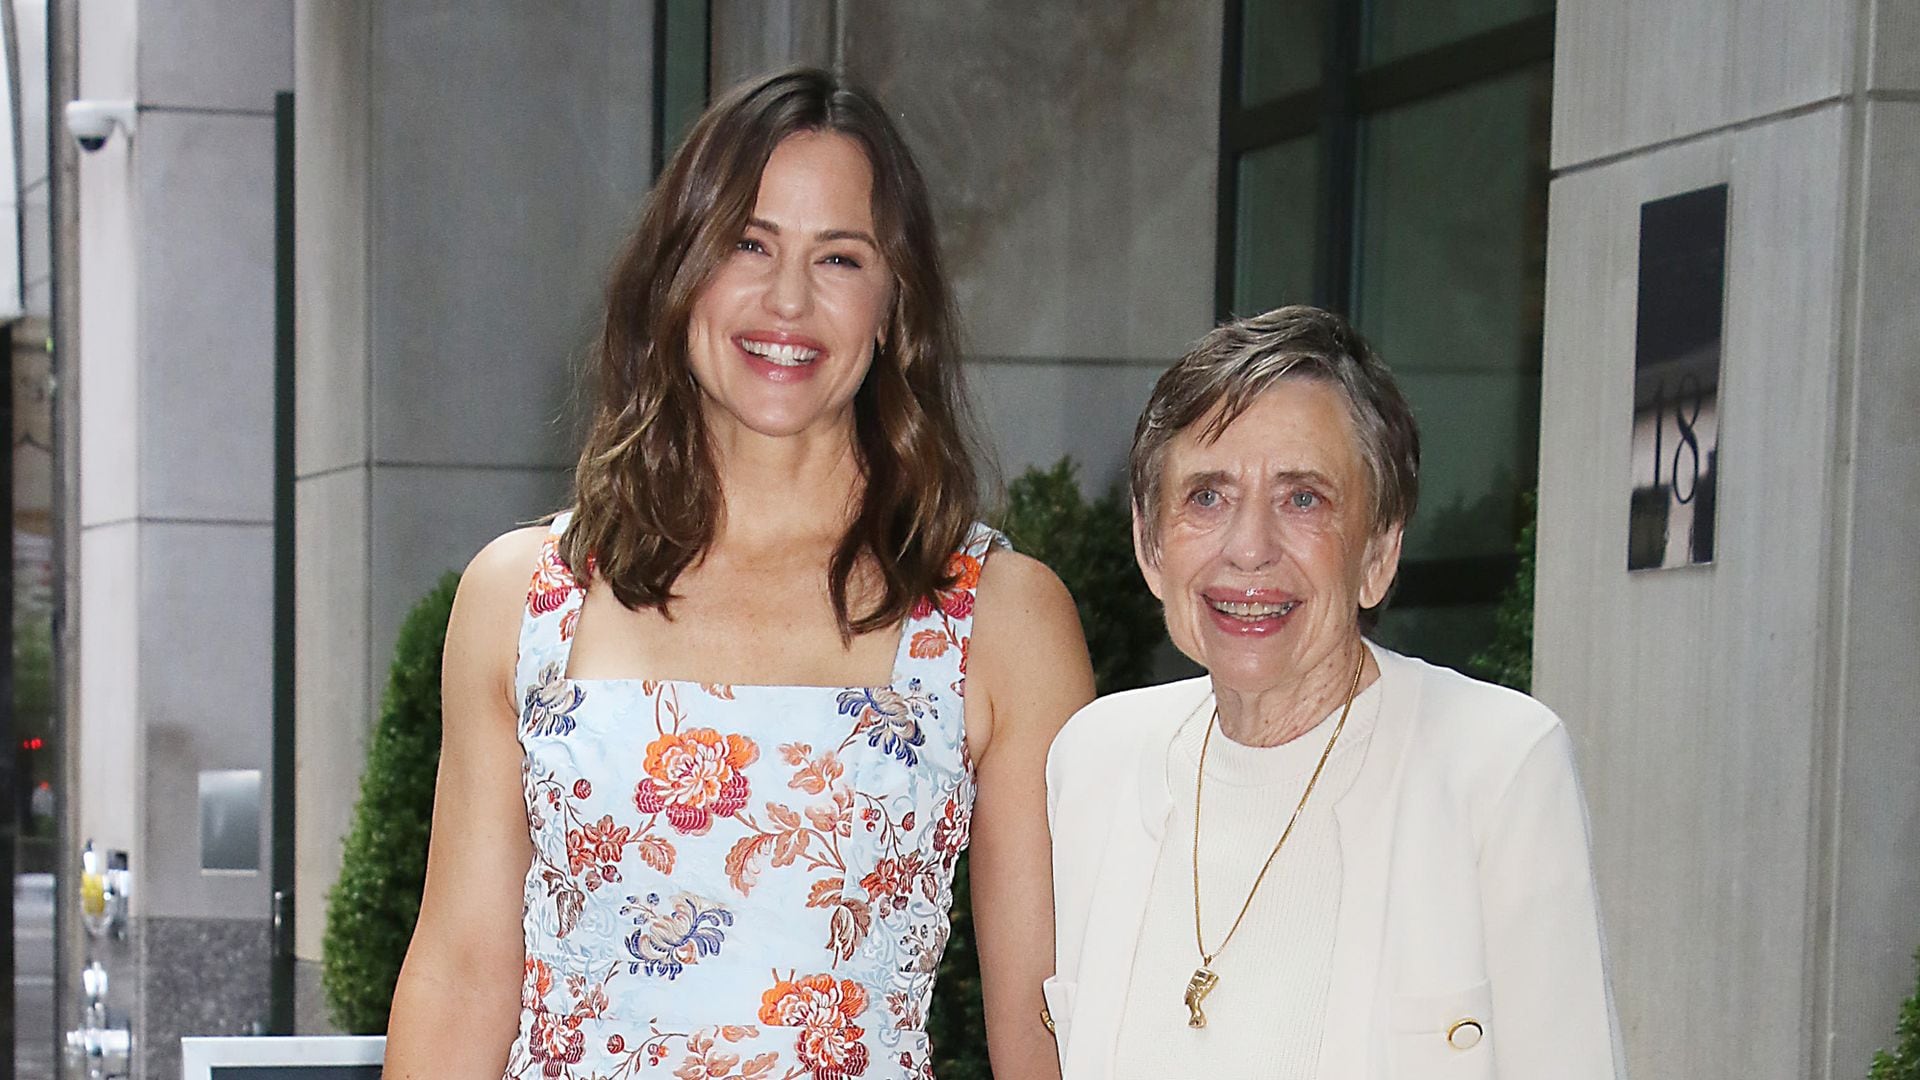 WATCH: Jennifer Garner and her mom open up about her dad's death in emotional video